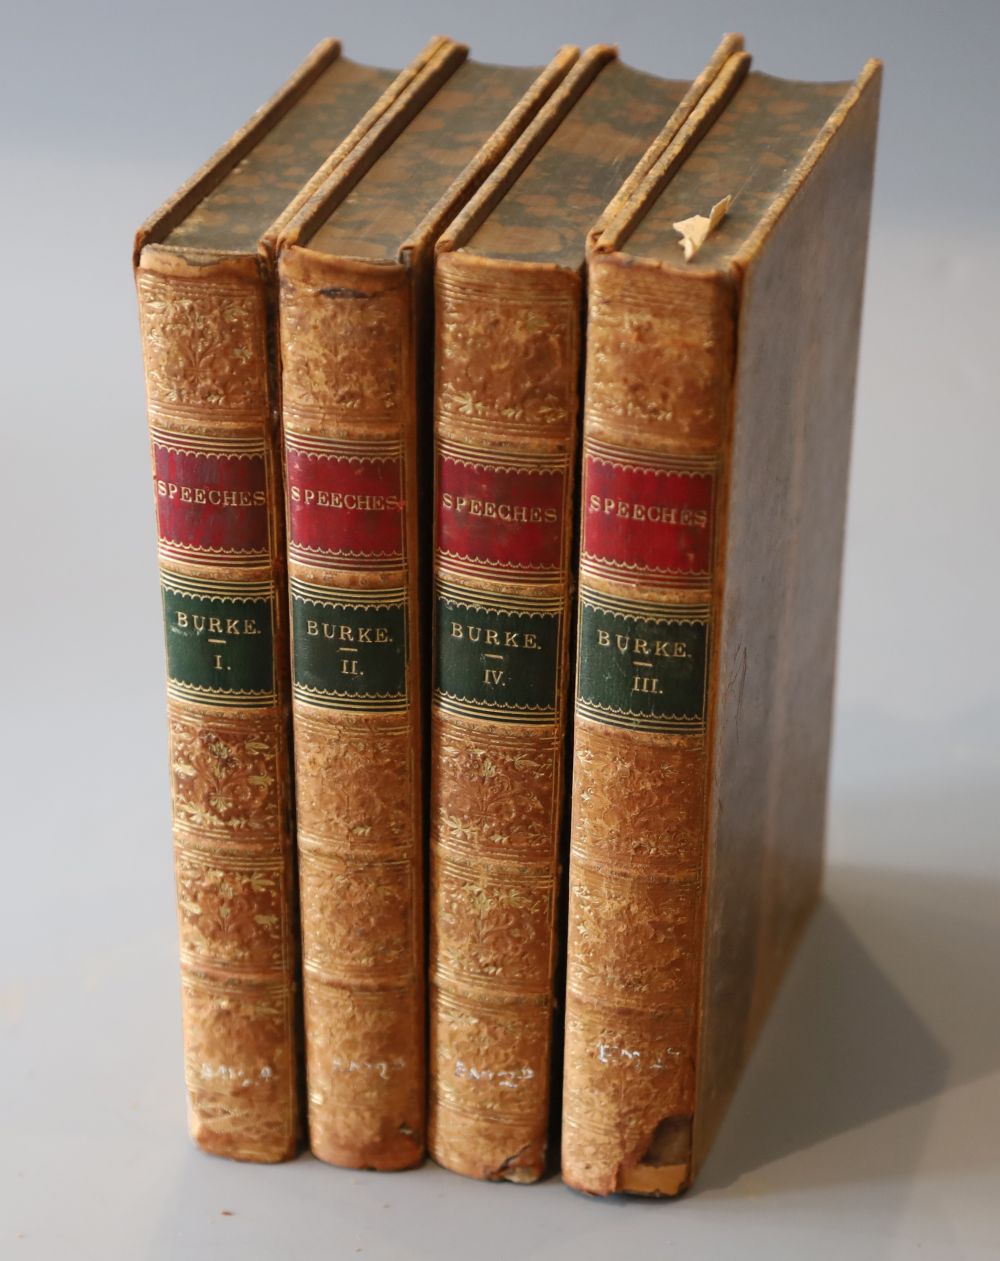 Burke, Edmund - The Speeches of the Right Honourable Edmund Burke, 1st edition, 4 vols, 8vo, tree calf, front board to vol. 4 detached,